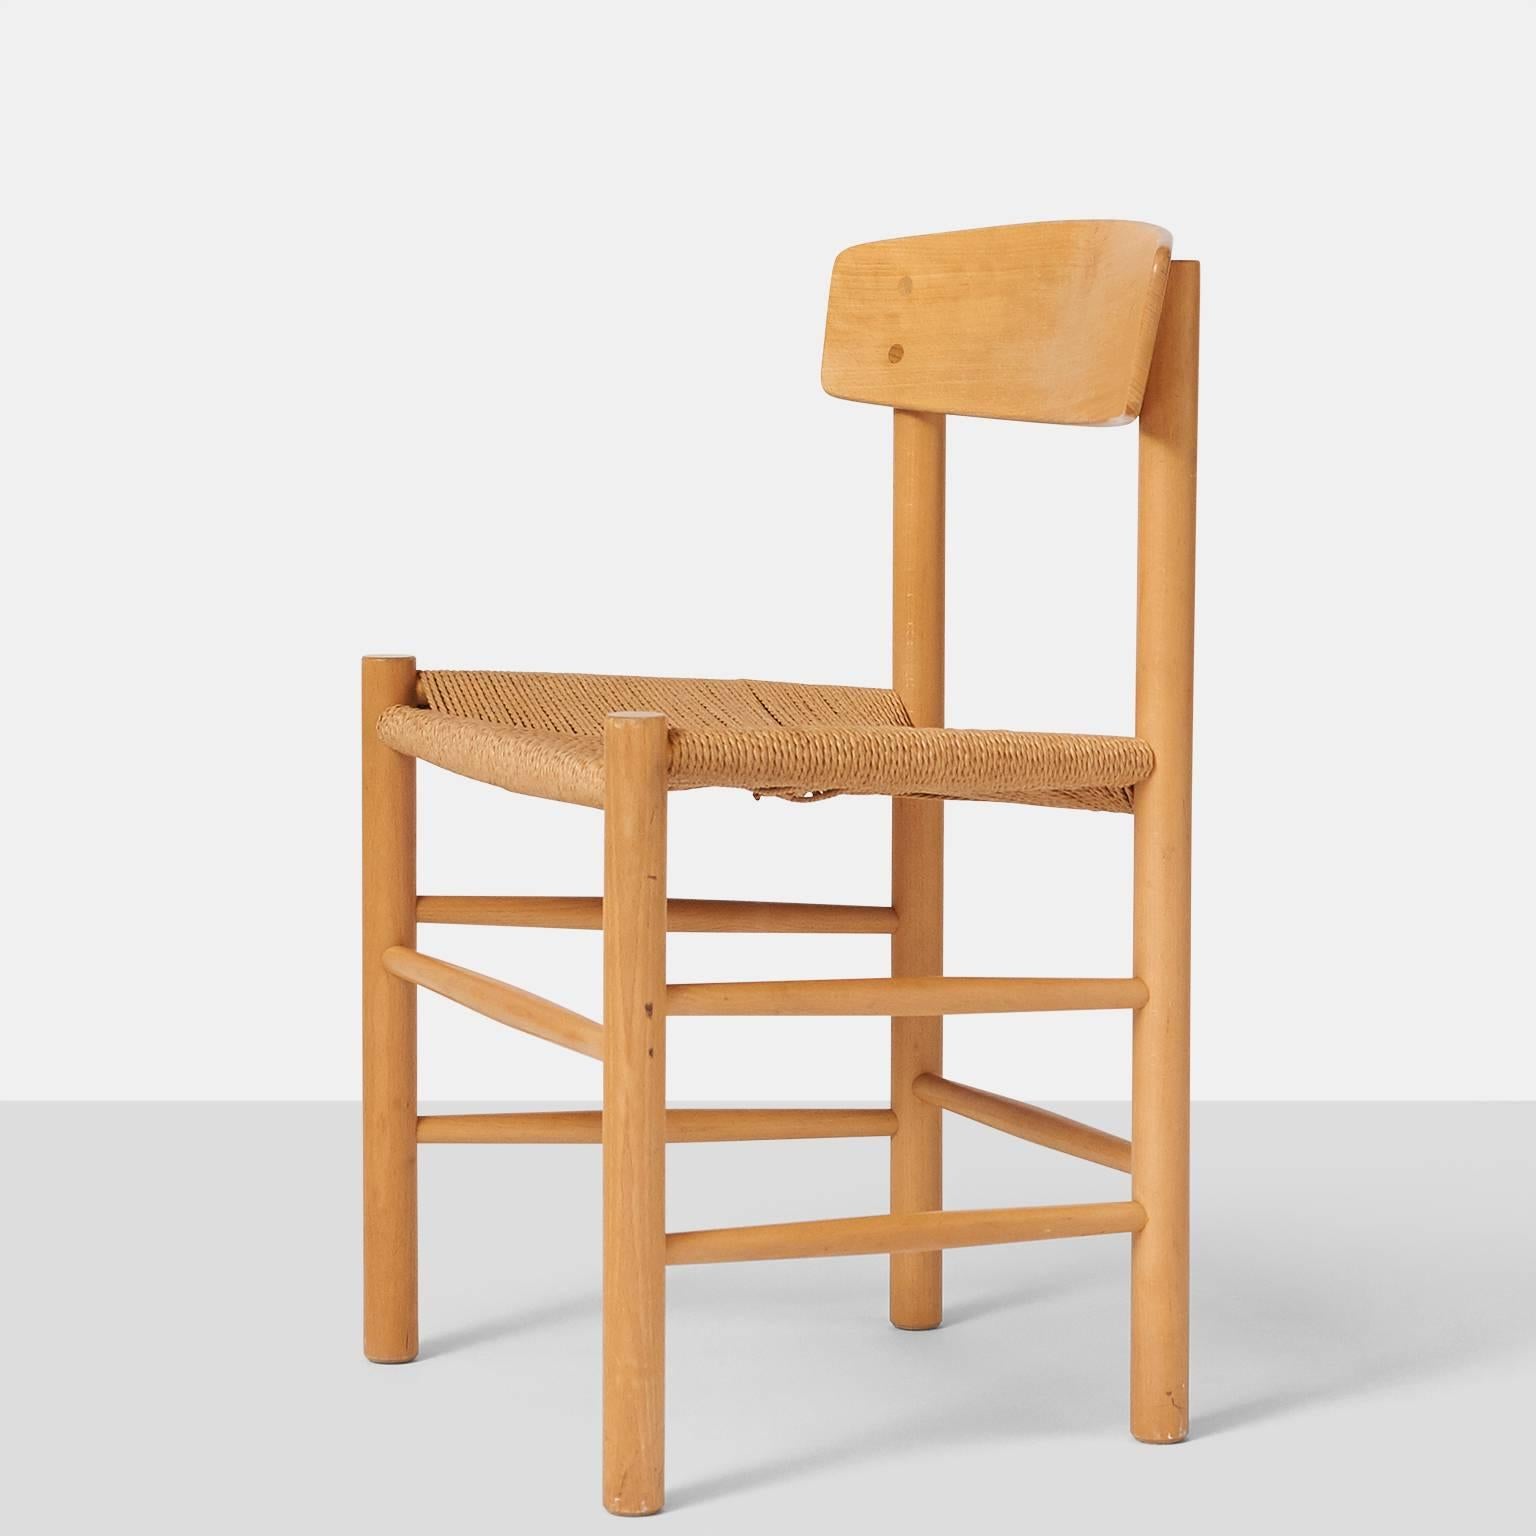 A side chair by Børge Mogensen for FDB. Also known as the Shaker chair, made in beech with paper cord seat.
Denmark, circa 1950s.